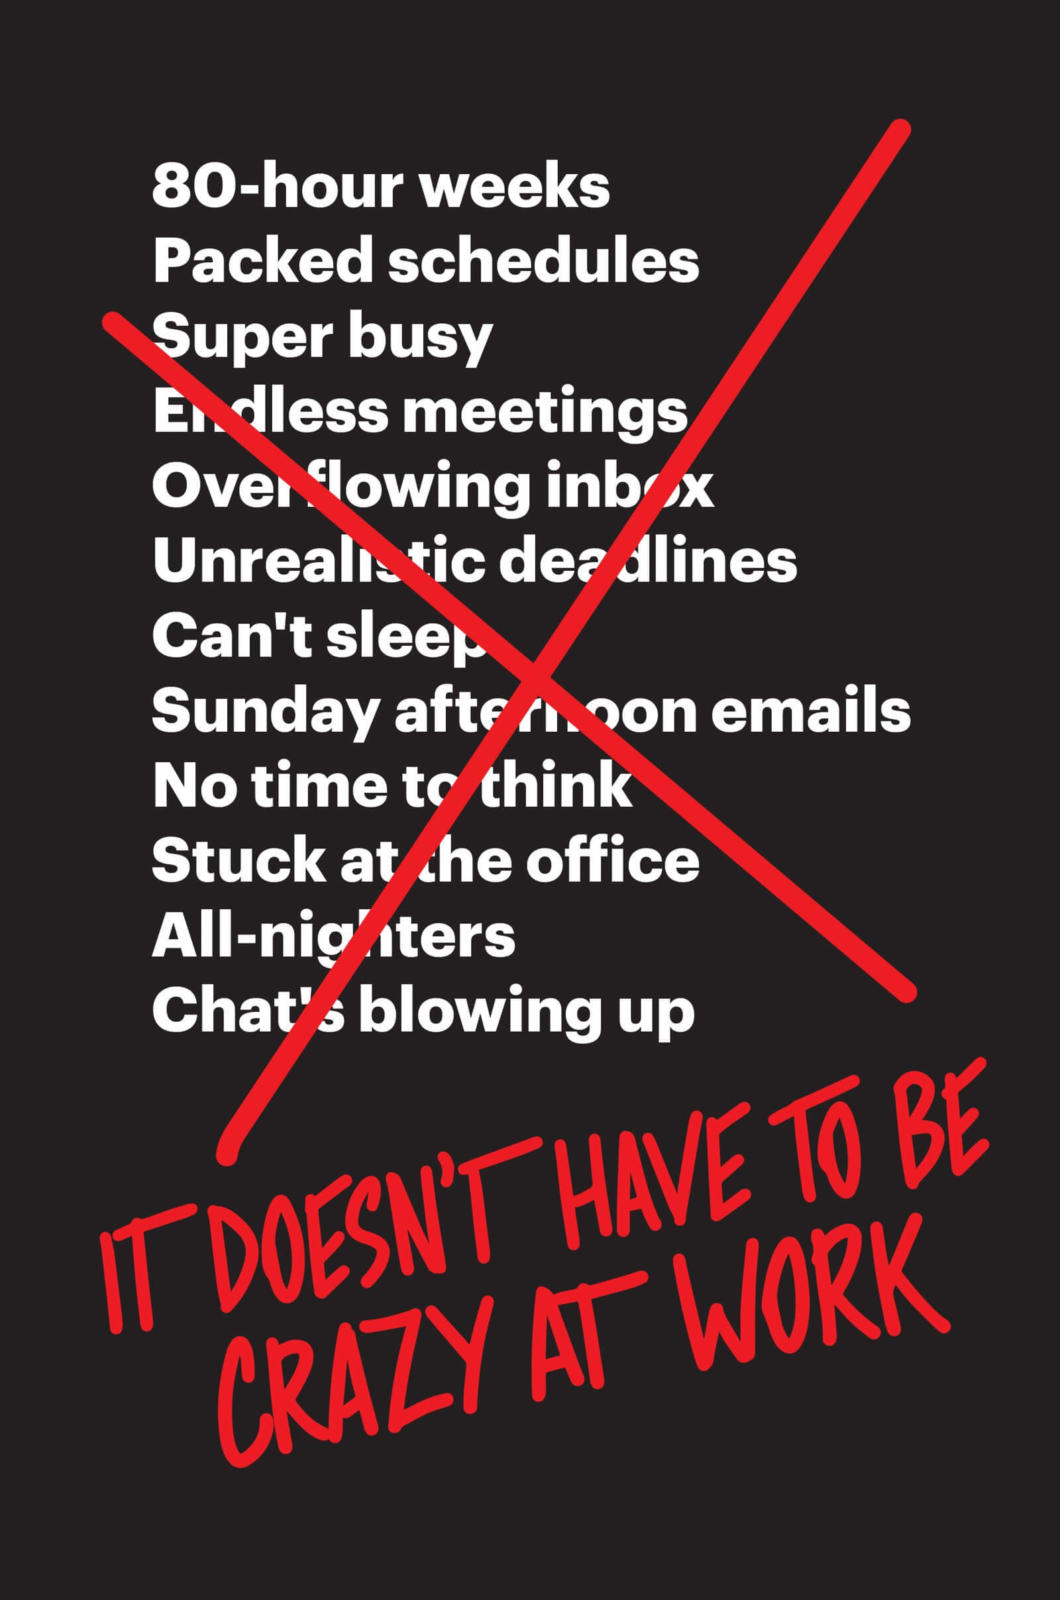 It Doesn't Have to Be Crazy at Work by David Heinemeier Hansson and Jason Fried